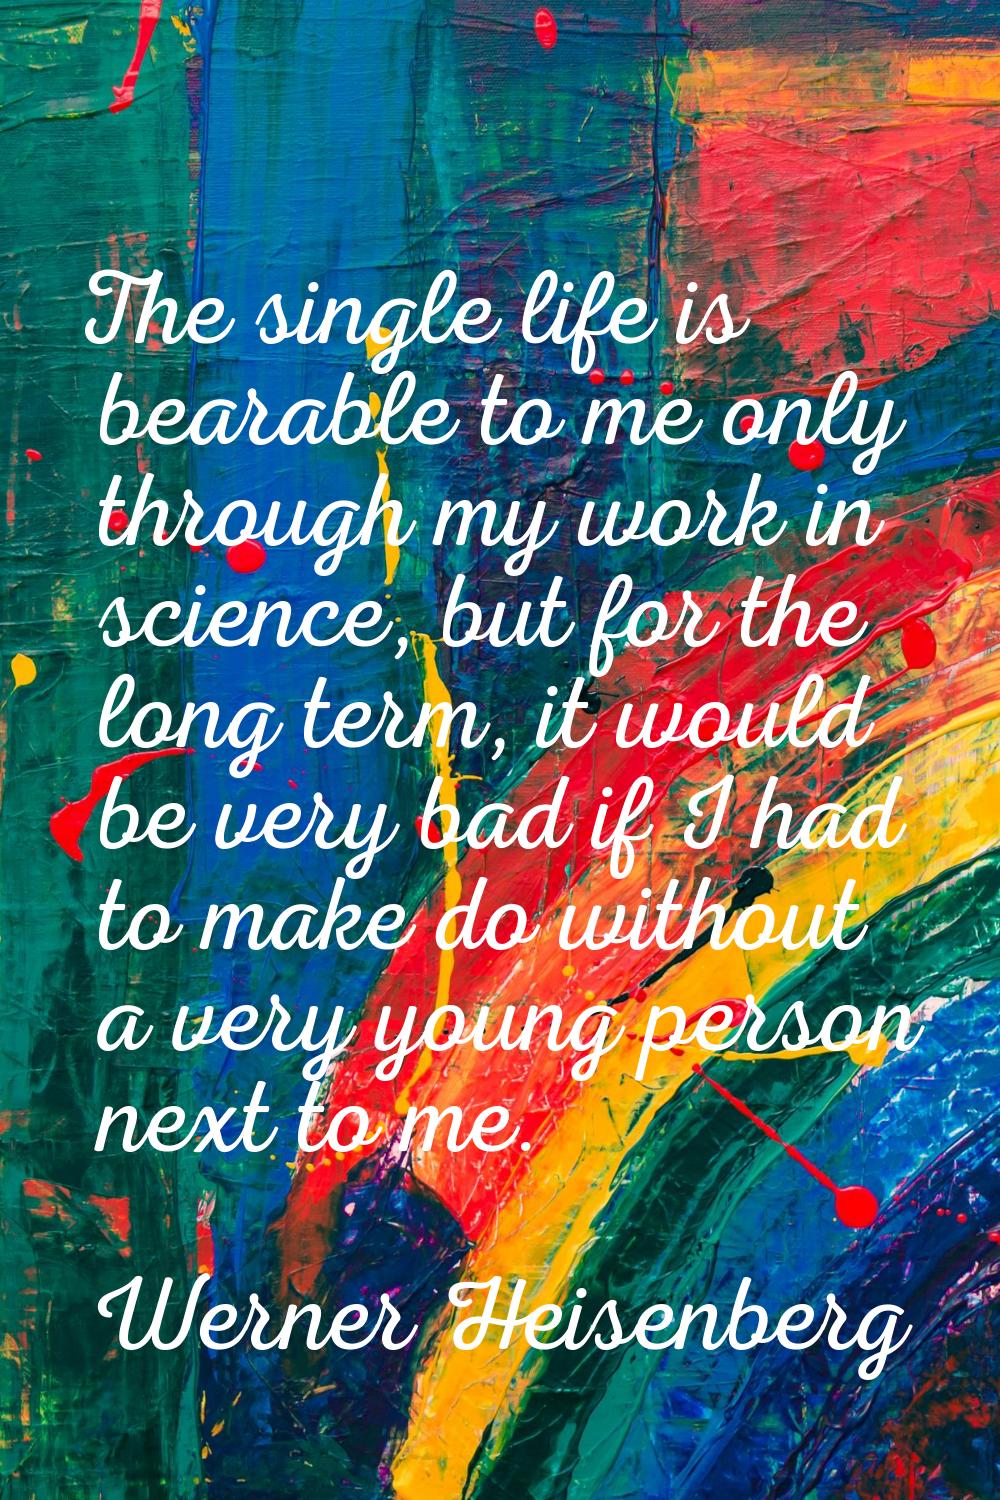 The single life is bearable to me only through my work in science, but for the long term, it would 